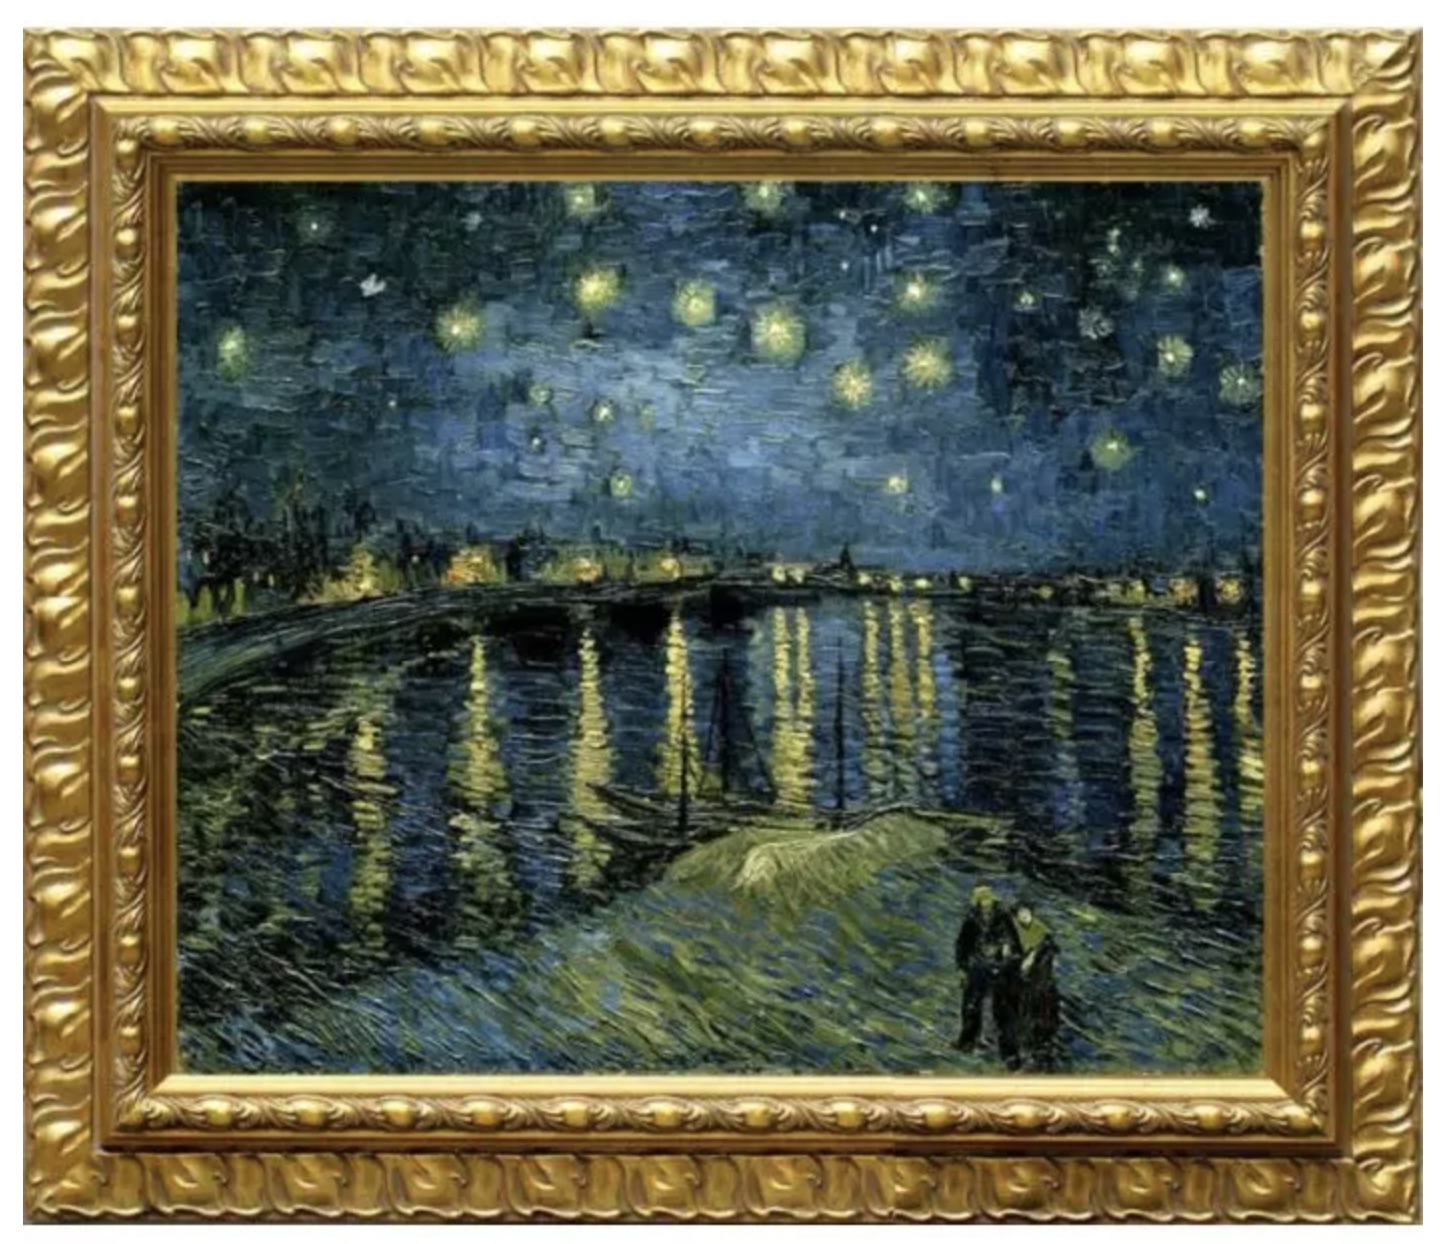 Vincent Van Gogh "Starry Night Over the Rhone" Oil Painting, After